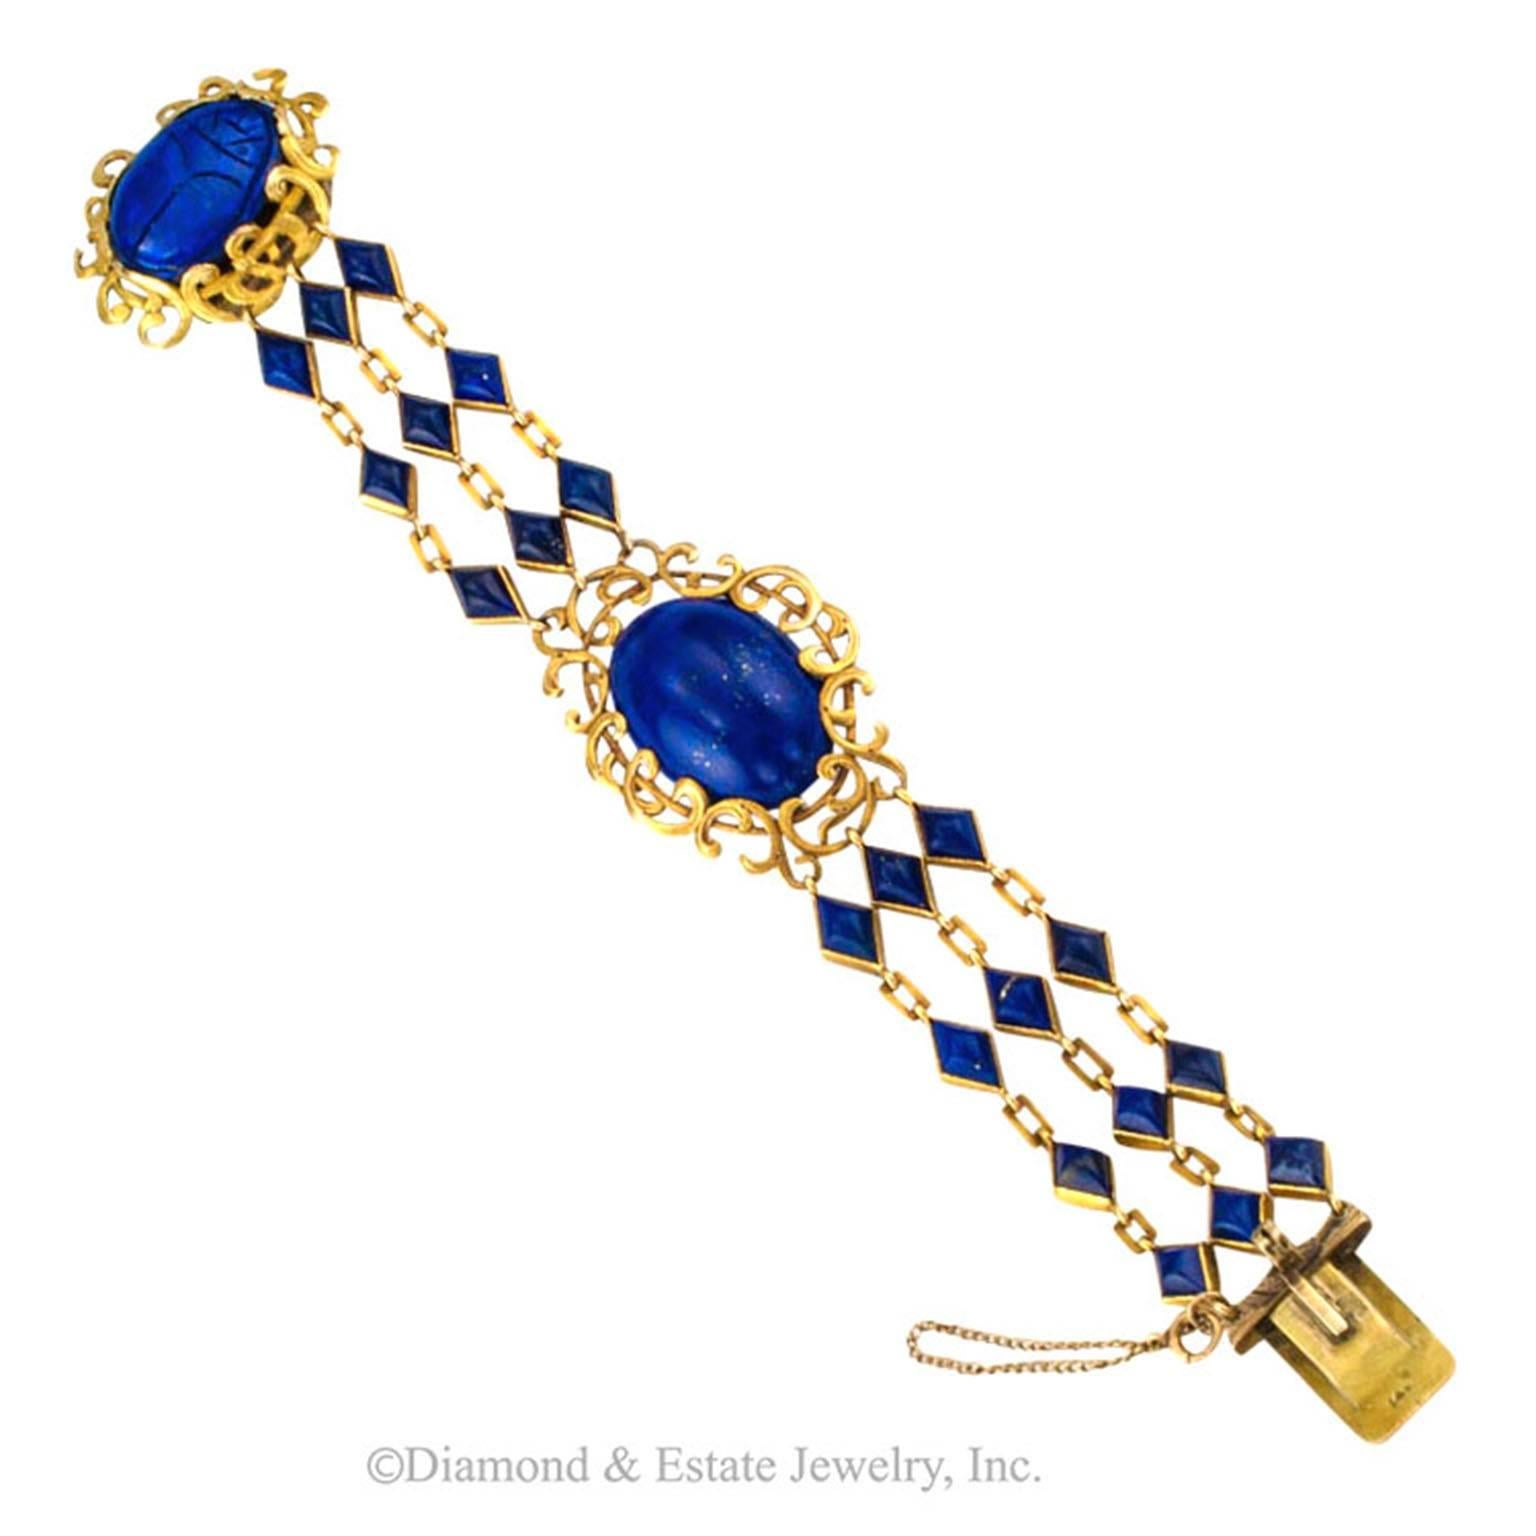 Arts and Crafts Lapis Lazuli Link Bracelet

A significant amount of handiwork distinguishes this most unique and cleverly designed Arts And Crafts bracelet comprising bezel-set diamond-shaped lapis lazuli links contrasting a large central oval